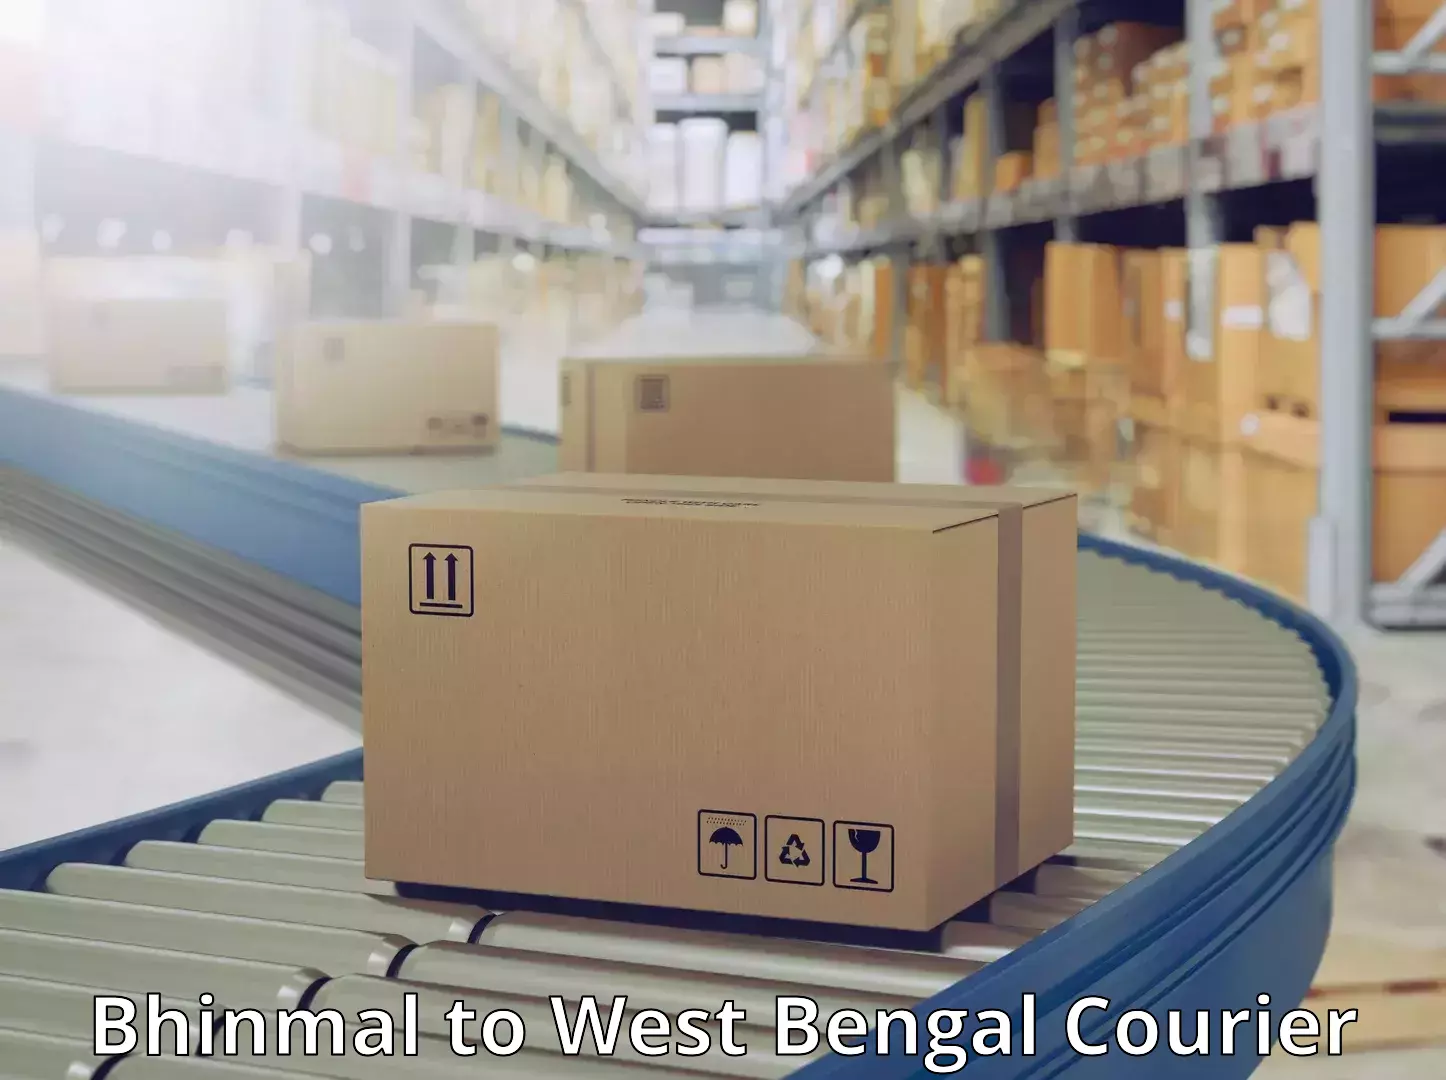 24-hour courier service Bhinmal to West Bengal